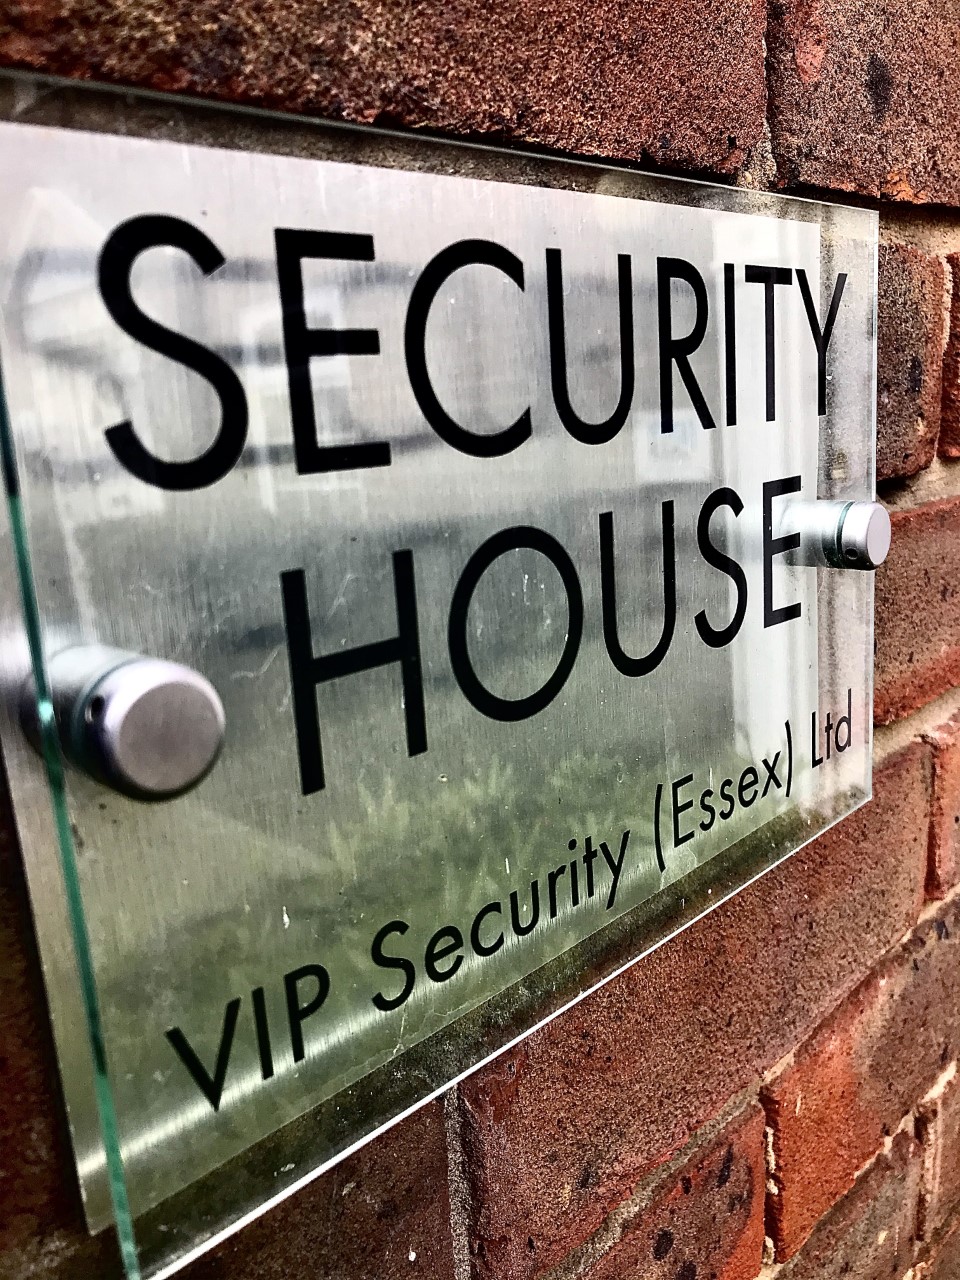 Security House office 